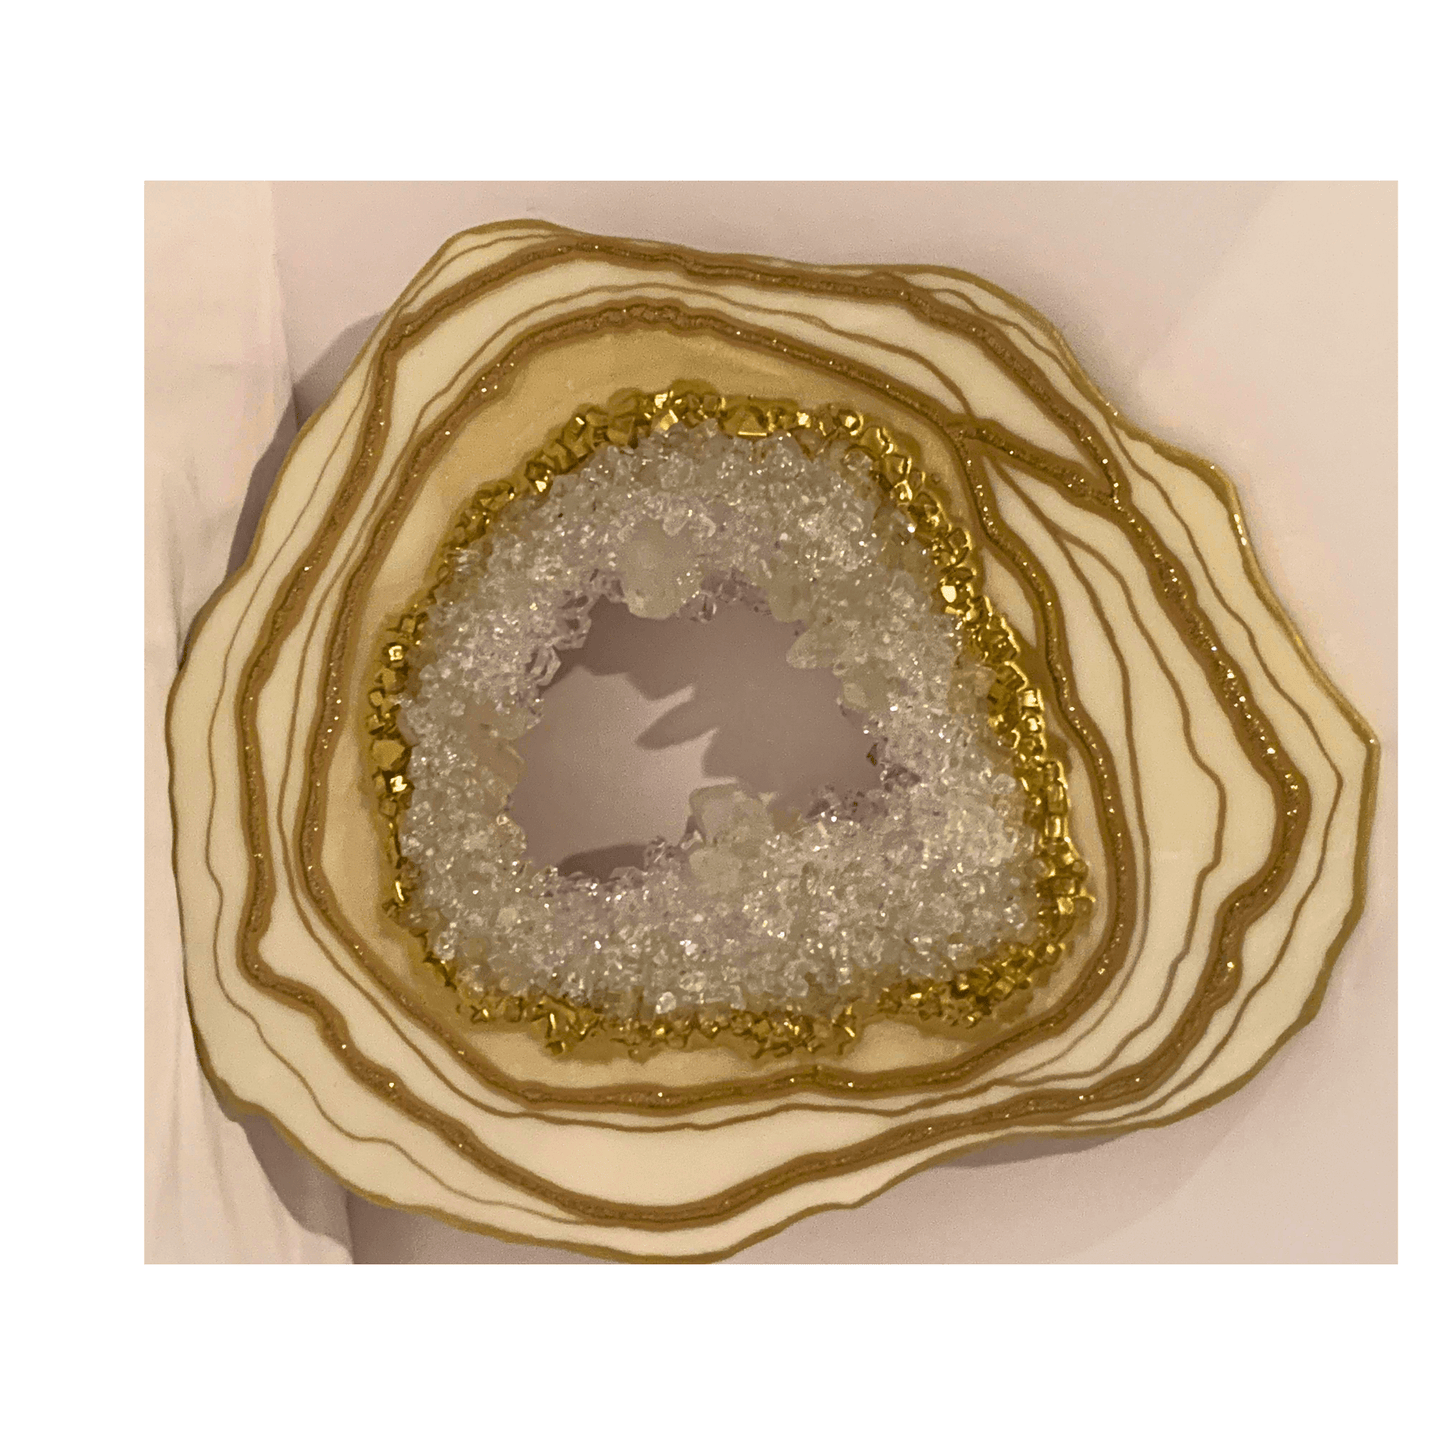 "CREAMY WHITE & GOLD GEODE" Modern Resin Art With Real Crystal Quartz Points